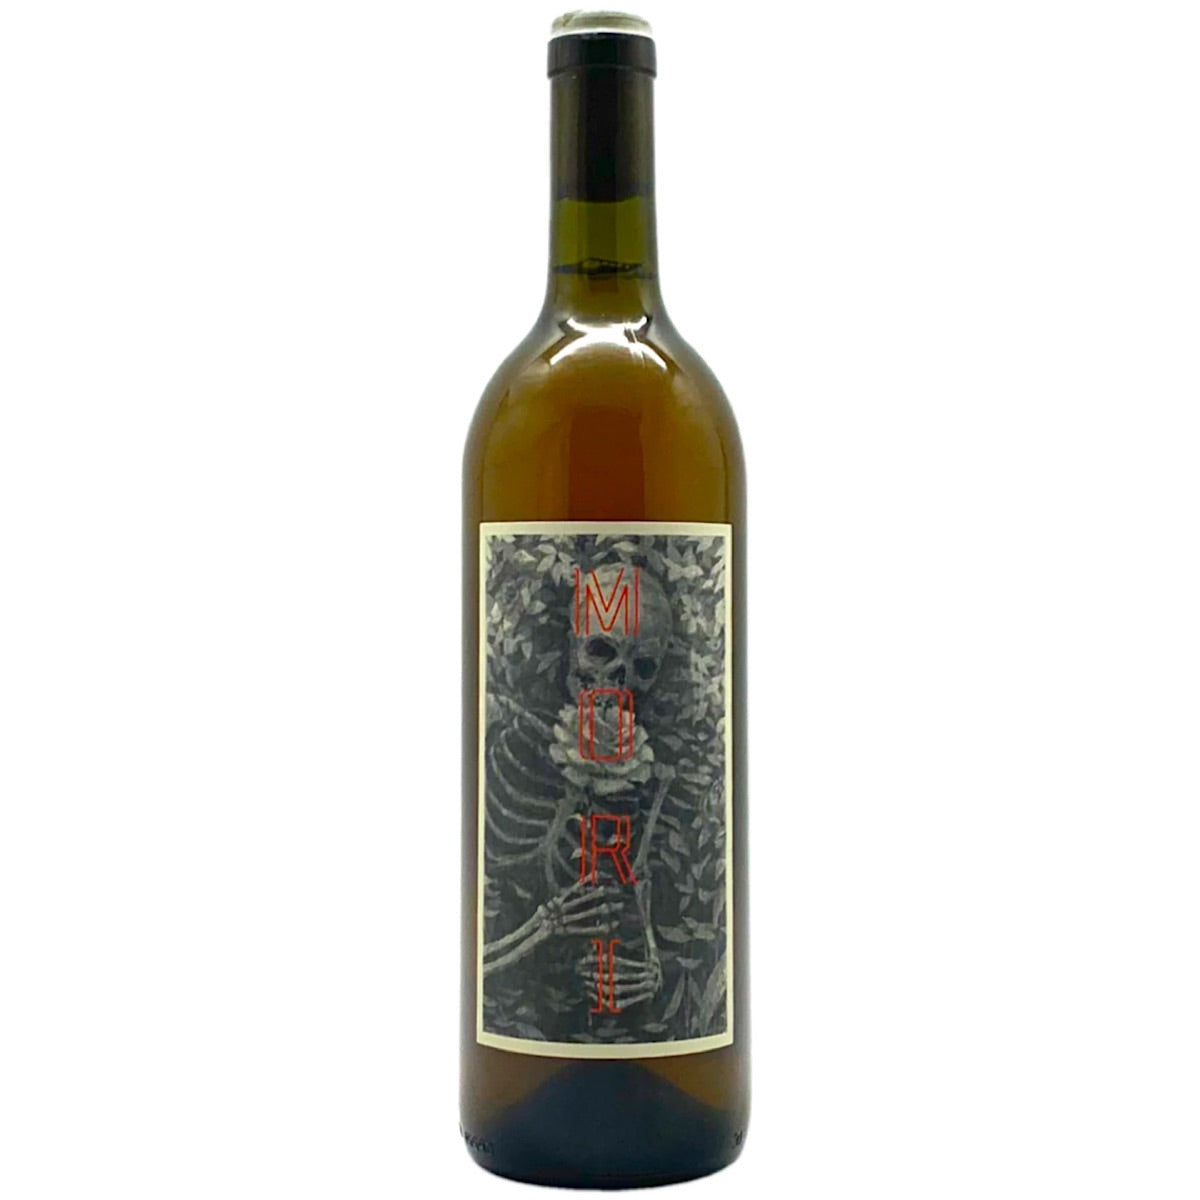 MOMENTO MORI WINES, GIVE UP THE GHOST, 6 Bottle Case 75cl